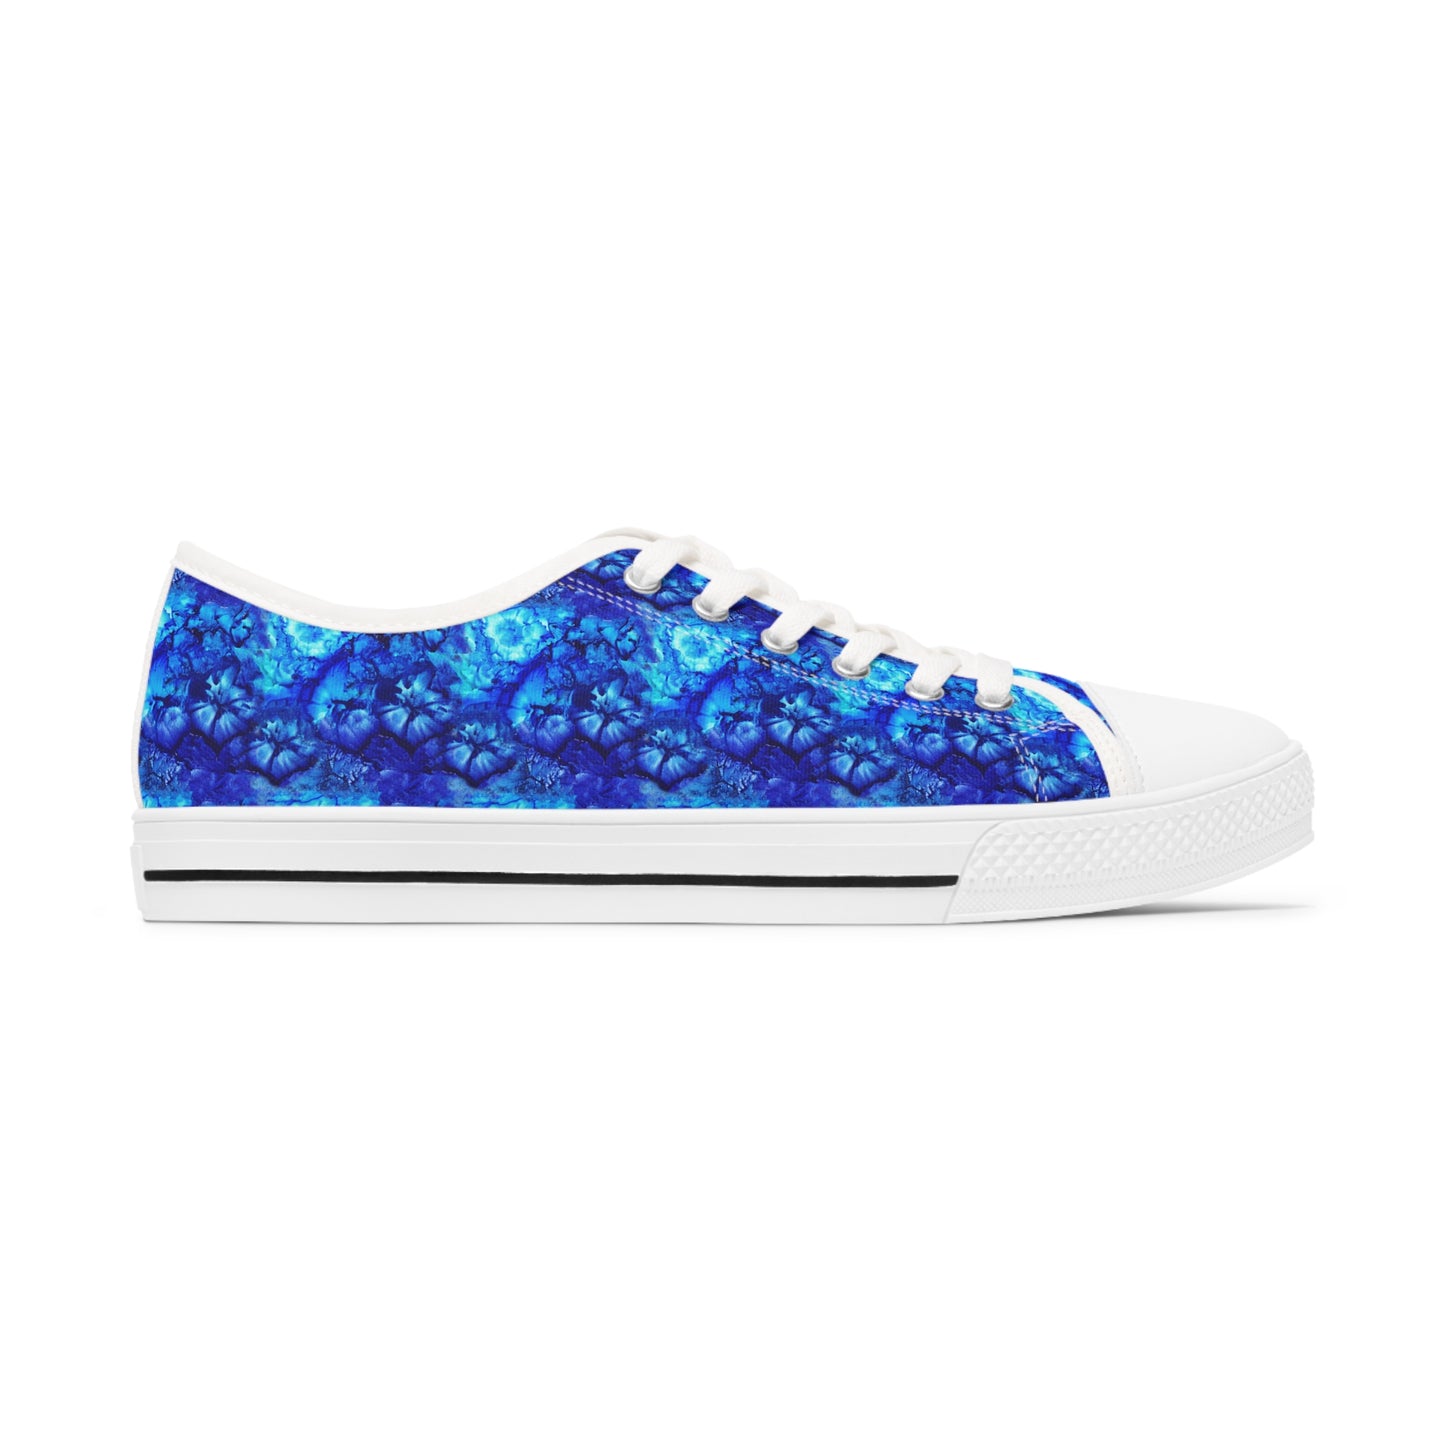 Serenity Women's Low-Top Fashion Sneakers